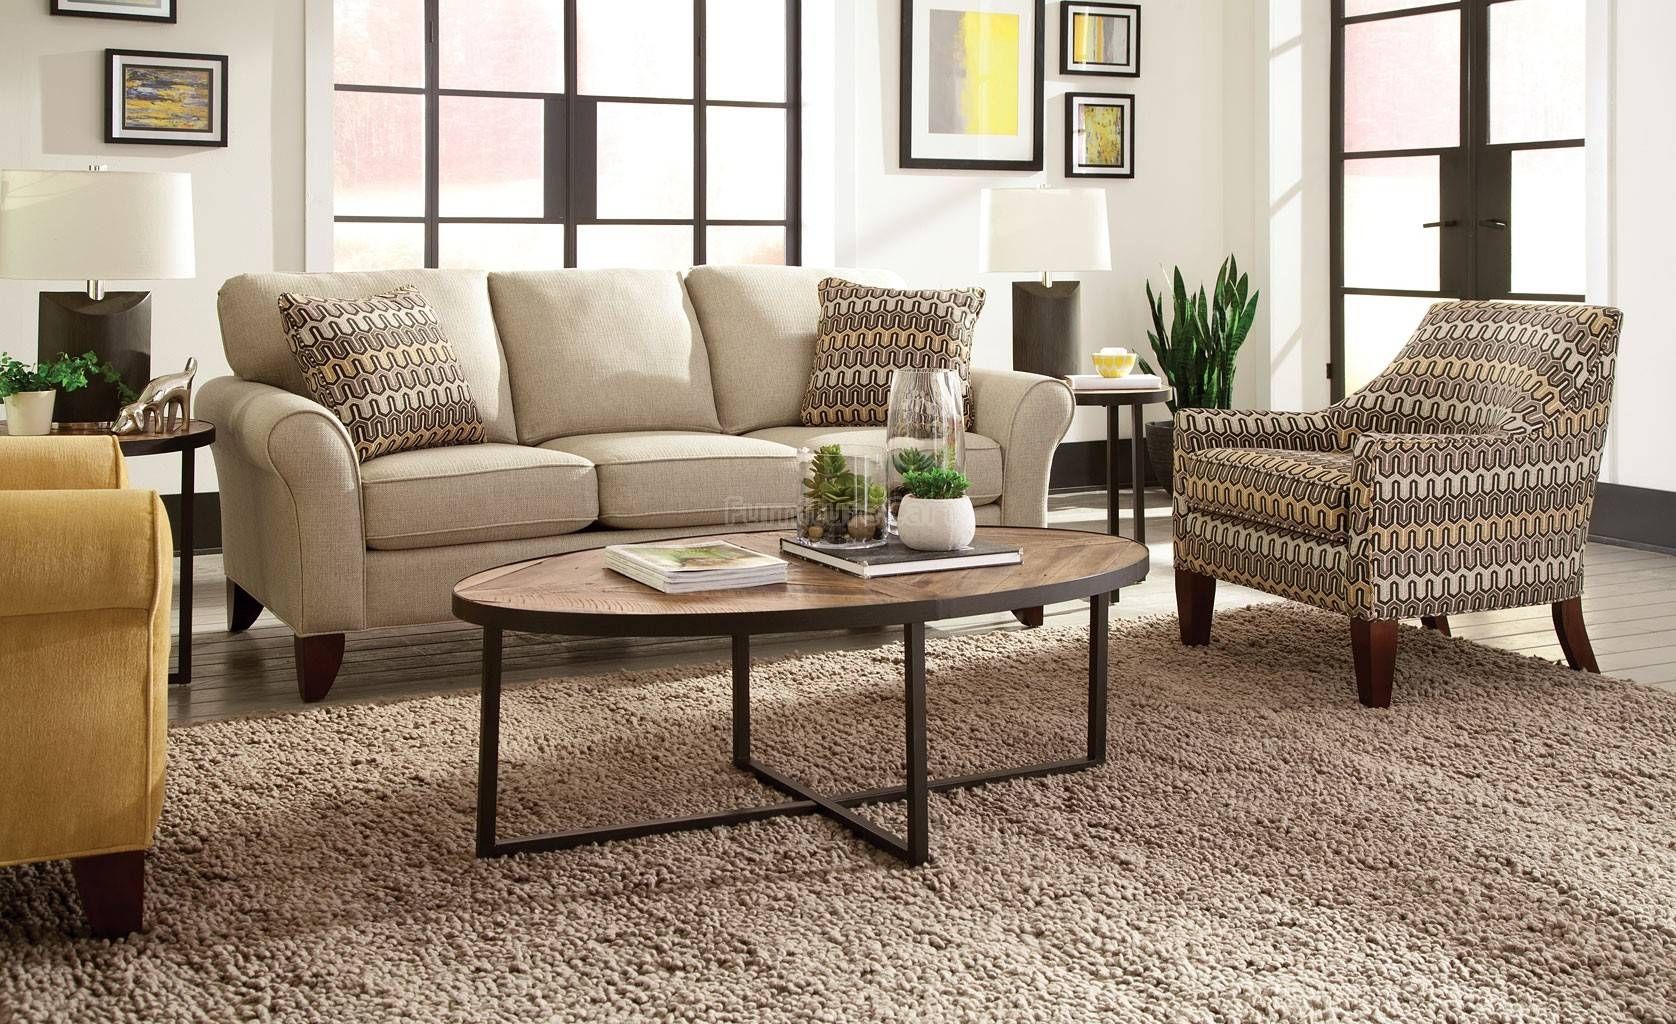 Furnitures: Fill Your Home With Luxury Craftmaster Furniture For Throughout Craftsman Sectional Sofa (View 18 of 30)